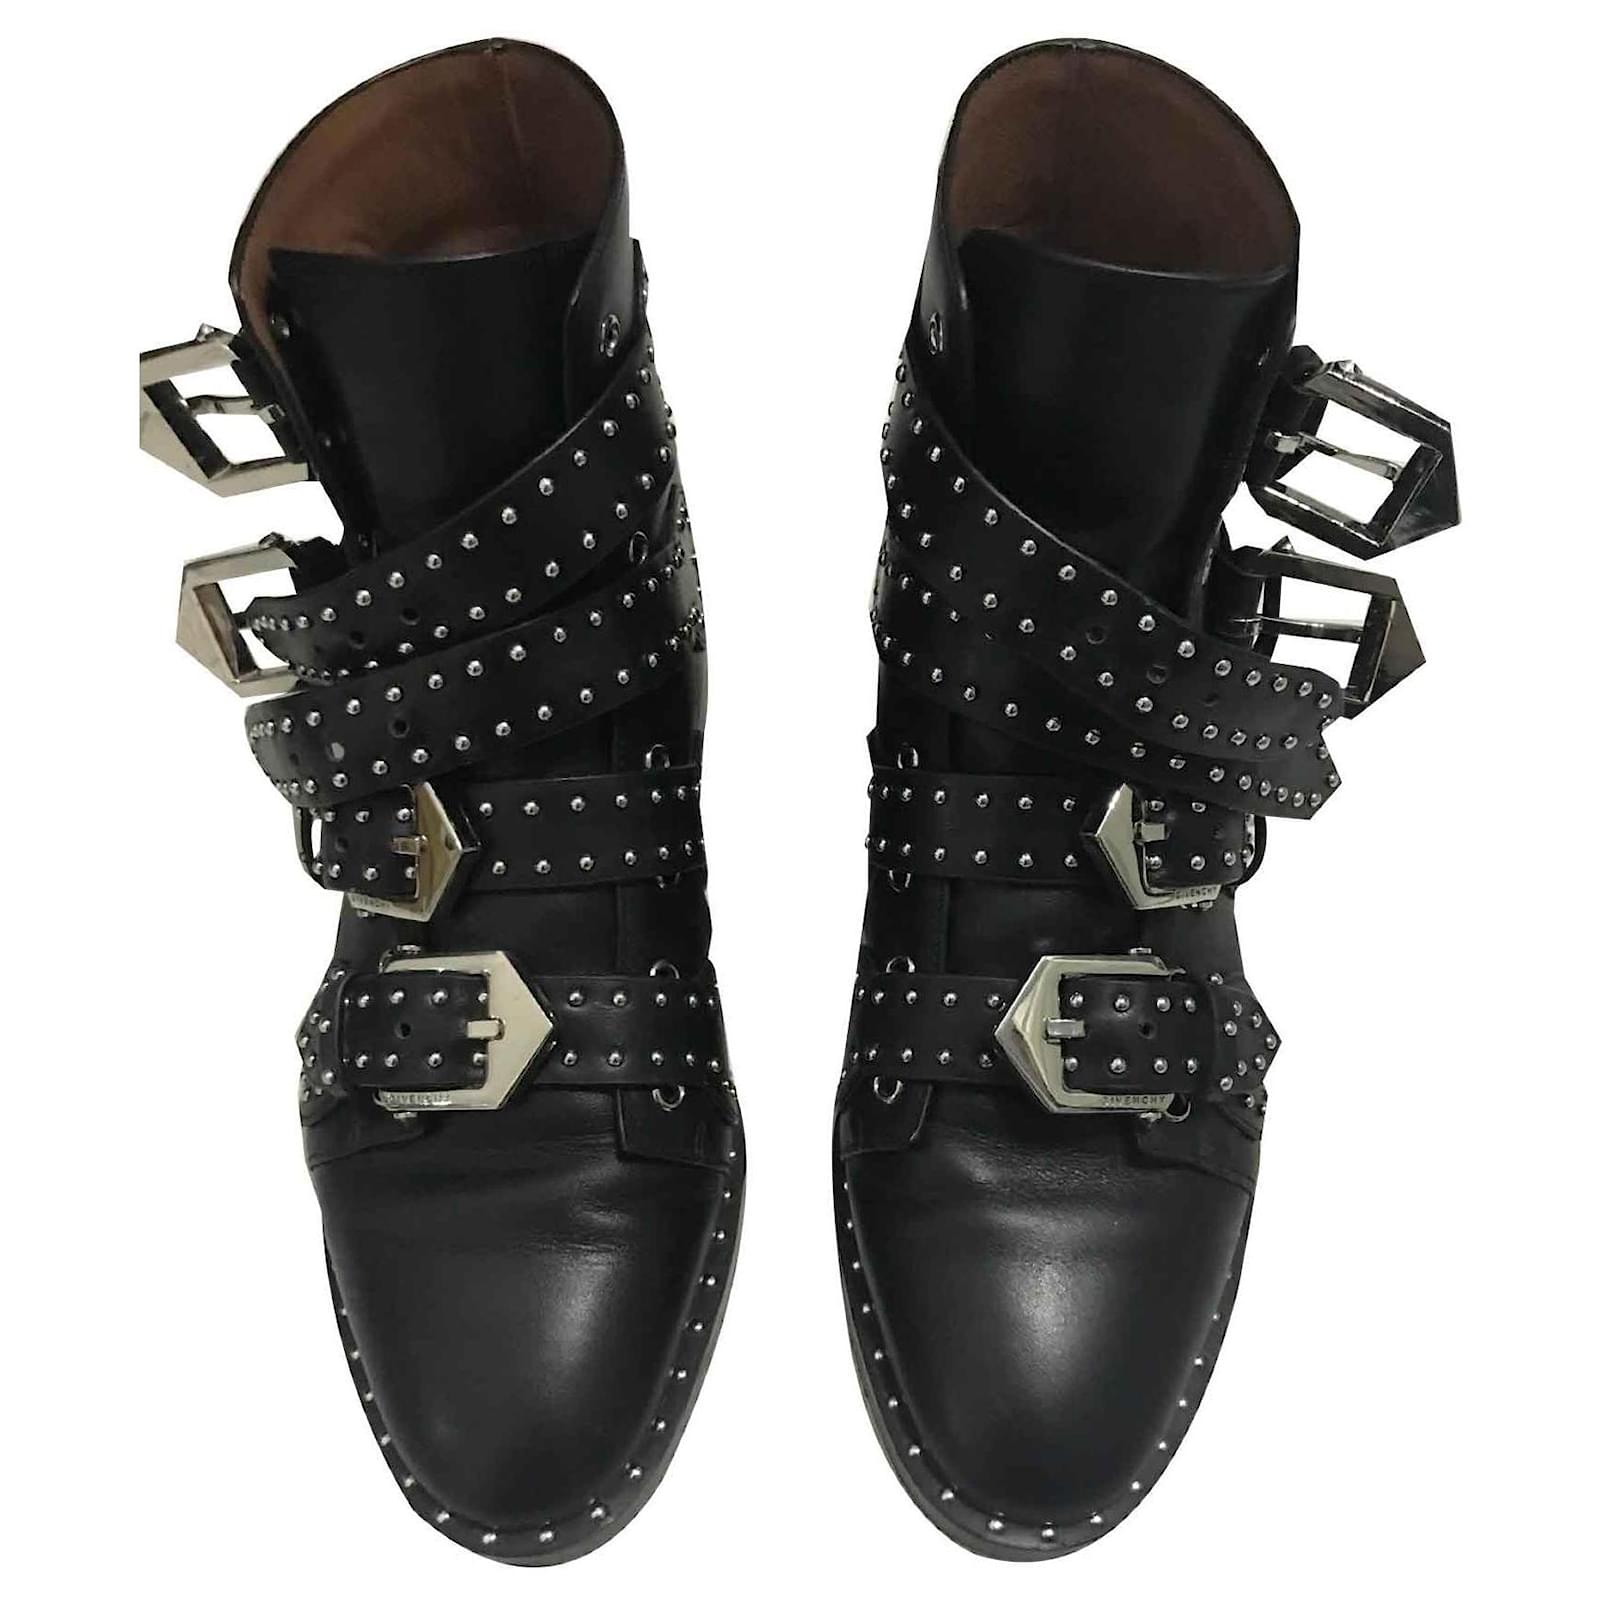 Givenchy society. Givenchy Ankle Boot. Givenchy Ankle Shoes. Сапоги Givenchy со звездами.